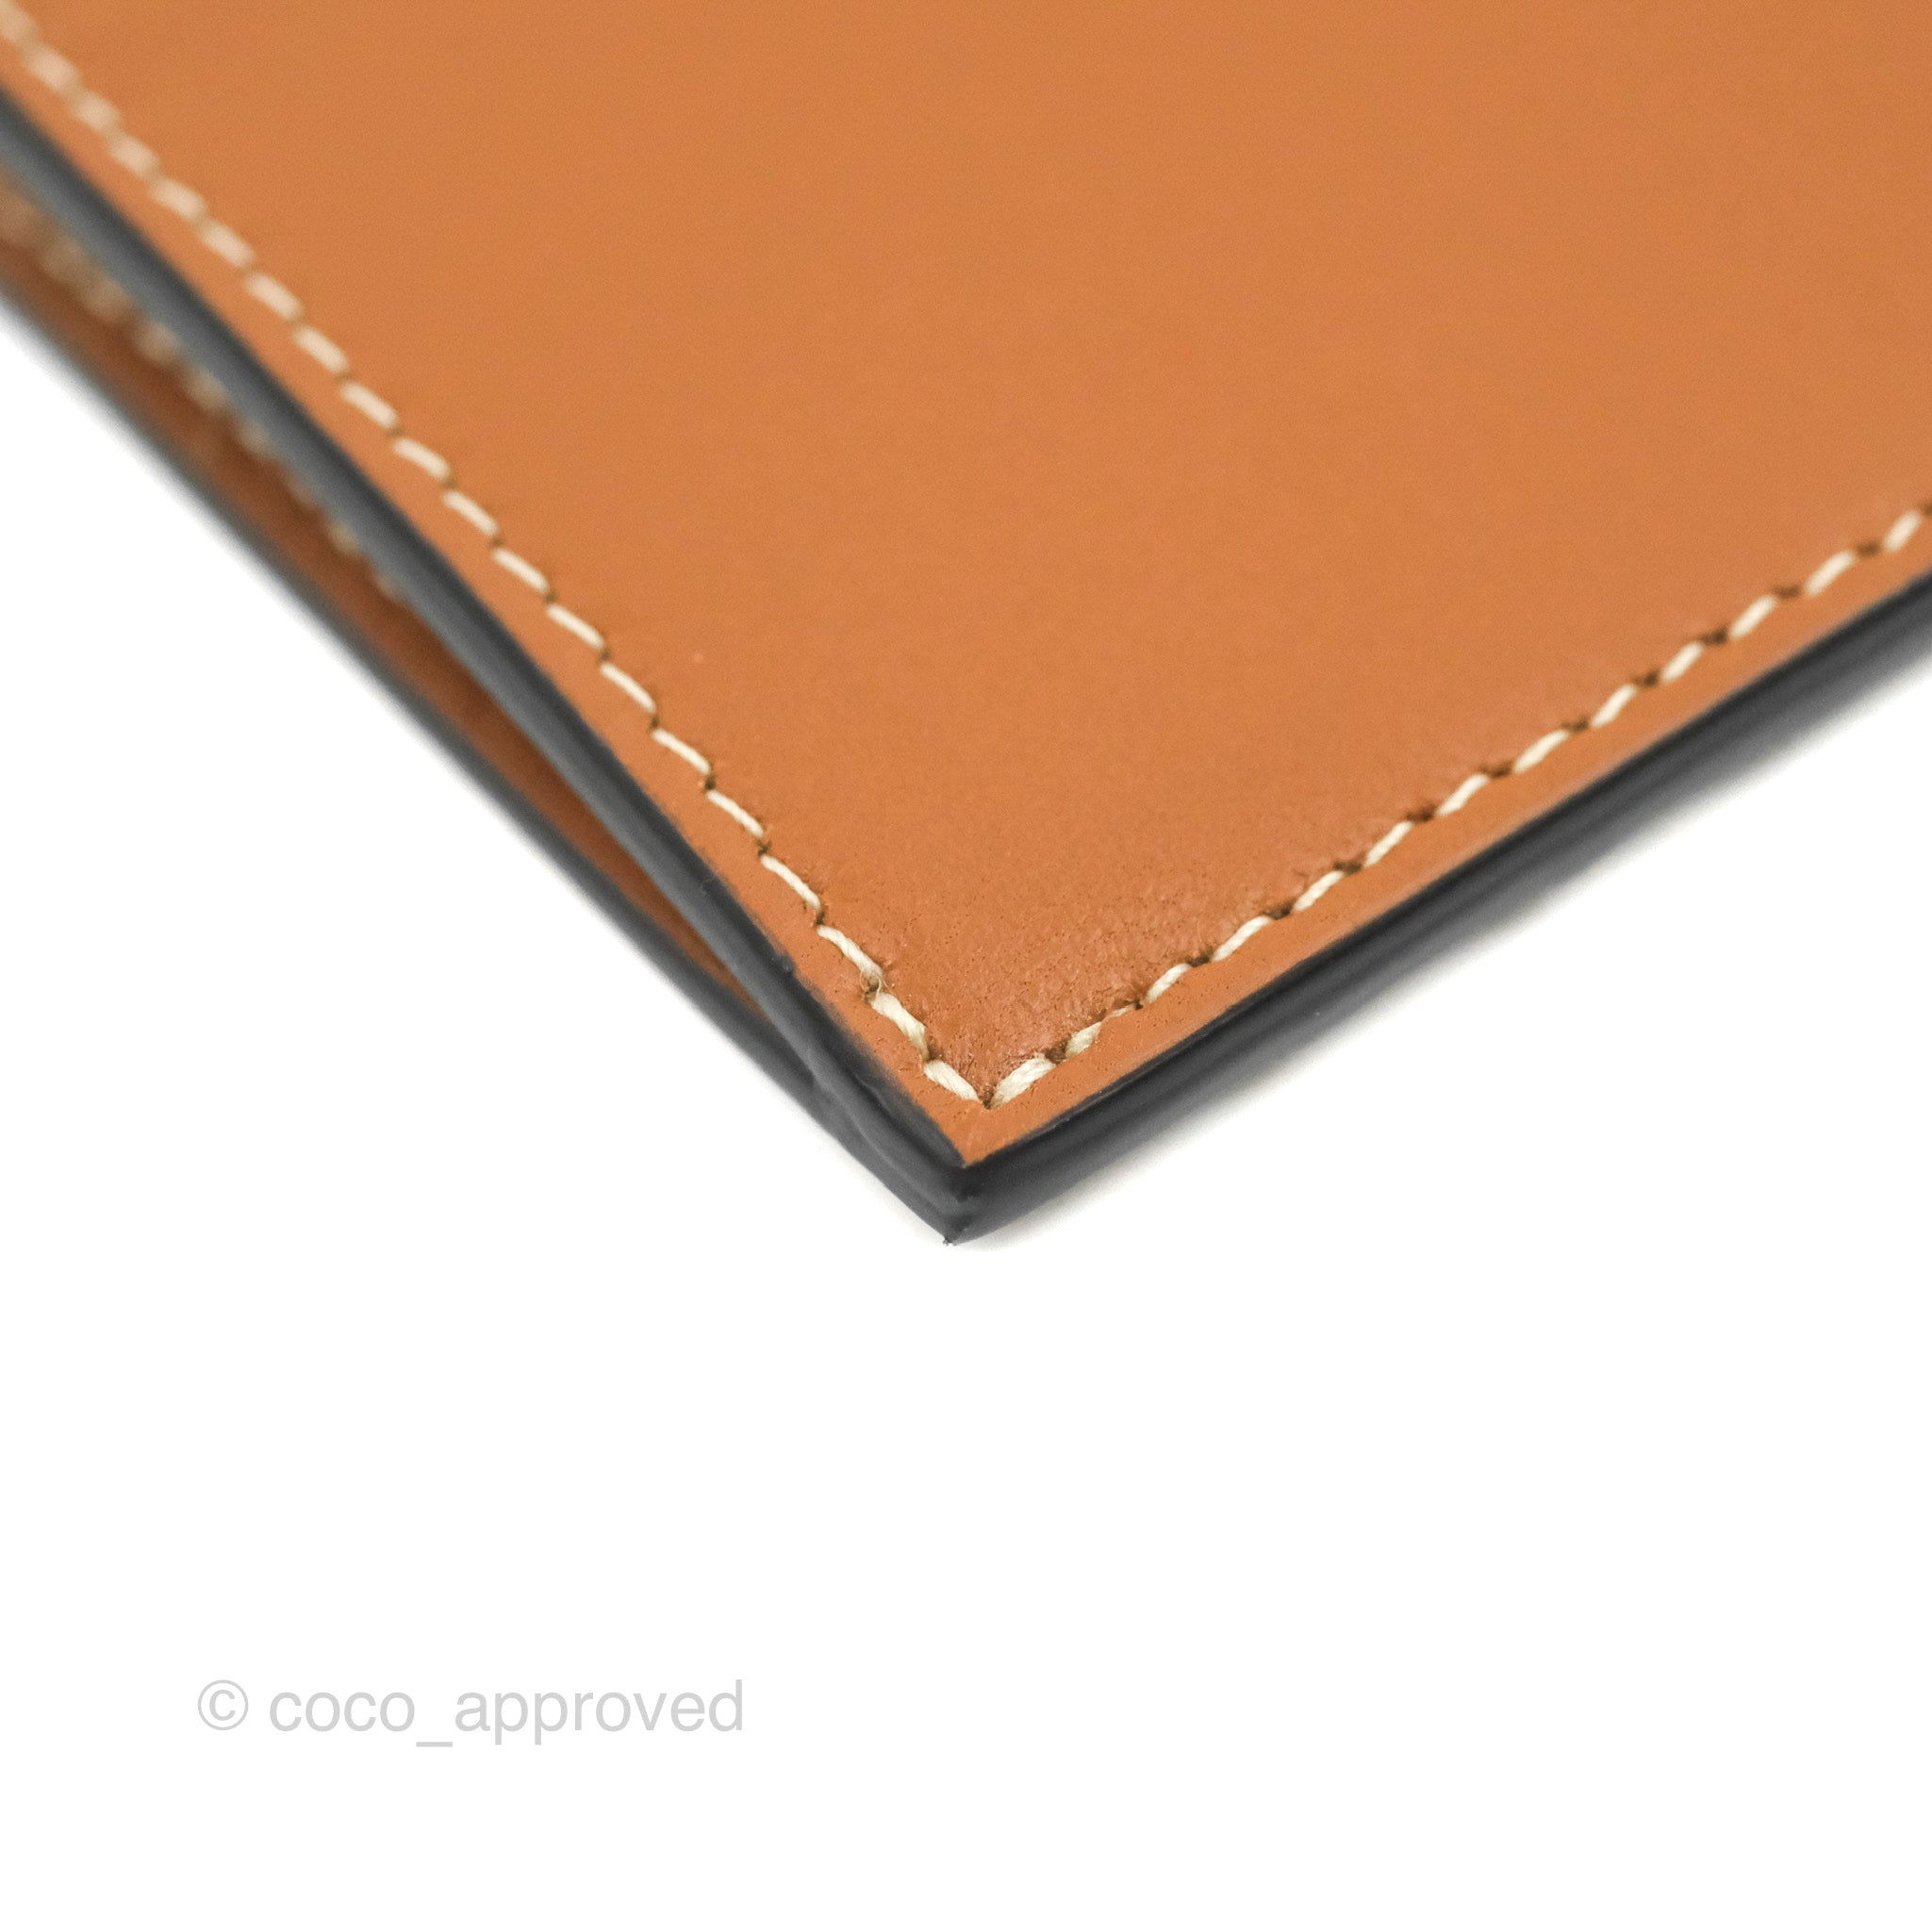 ZIPPED CARD HOLDER IN TRIOMPHE CANVAS AND LAMBSKIN - TAN